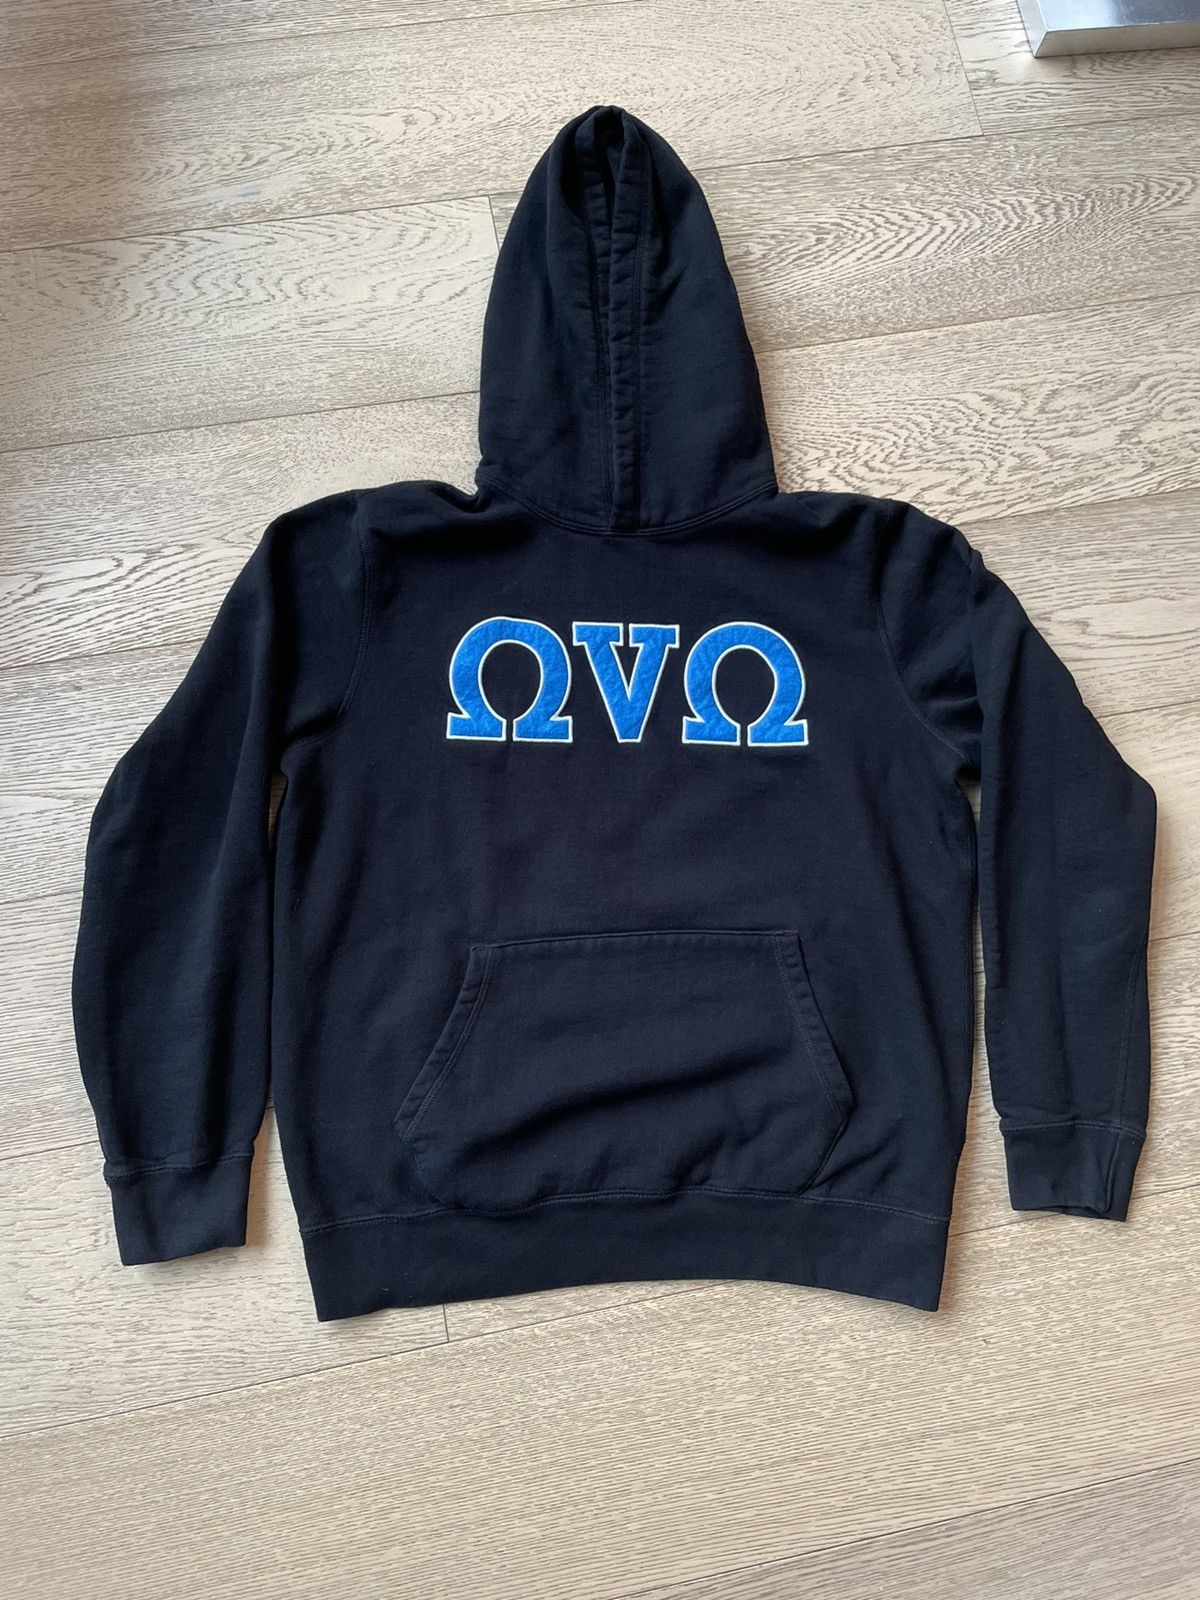 OVO OG Owl Hoodie - XS - Brand New with Tags : r/OctobersVeryOwn